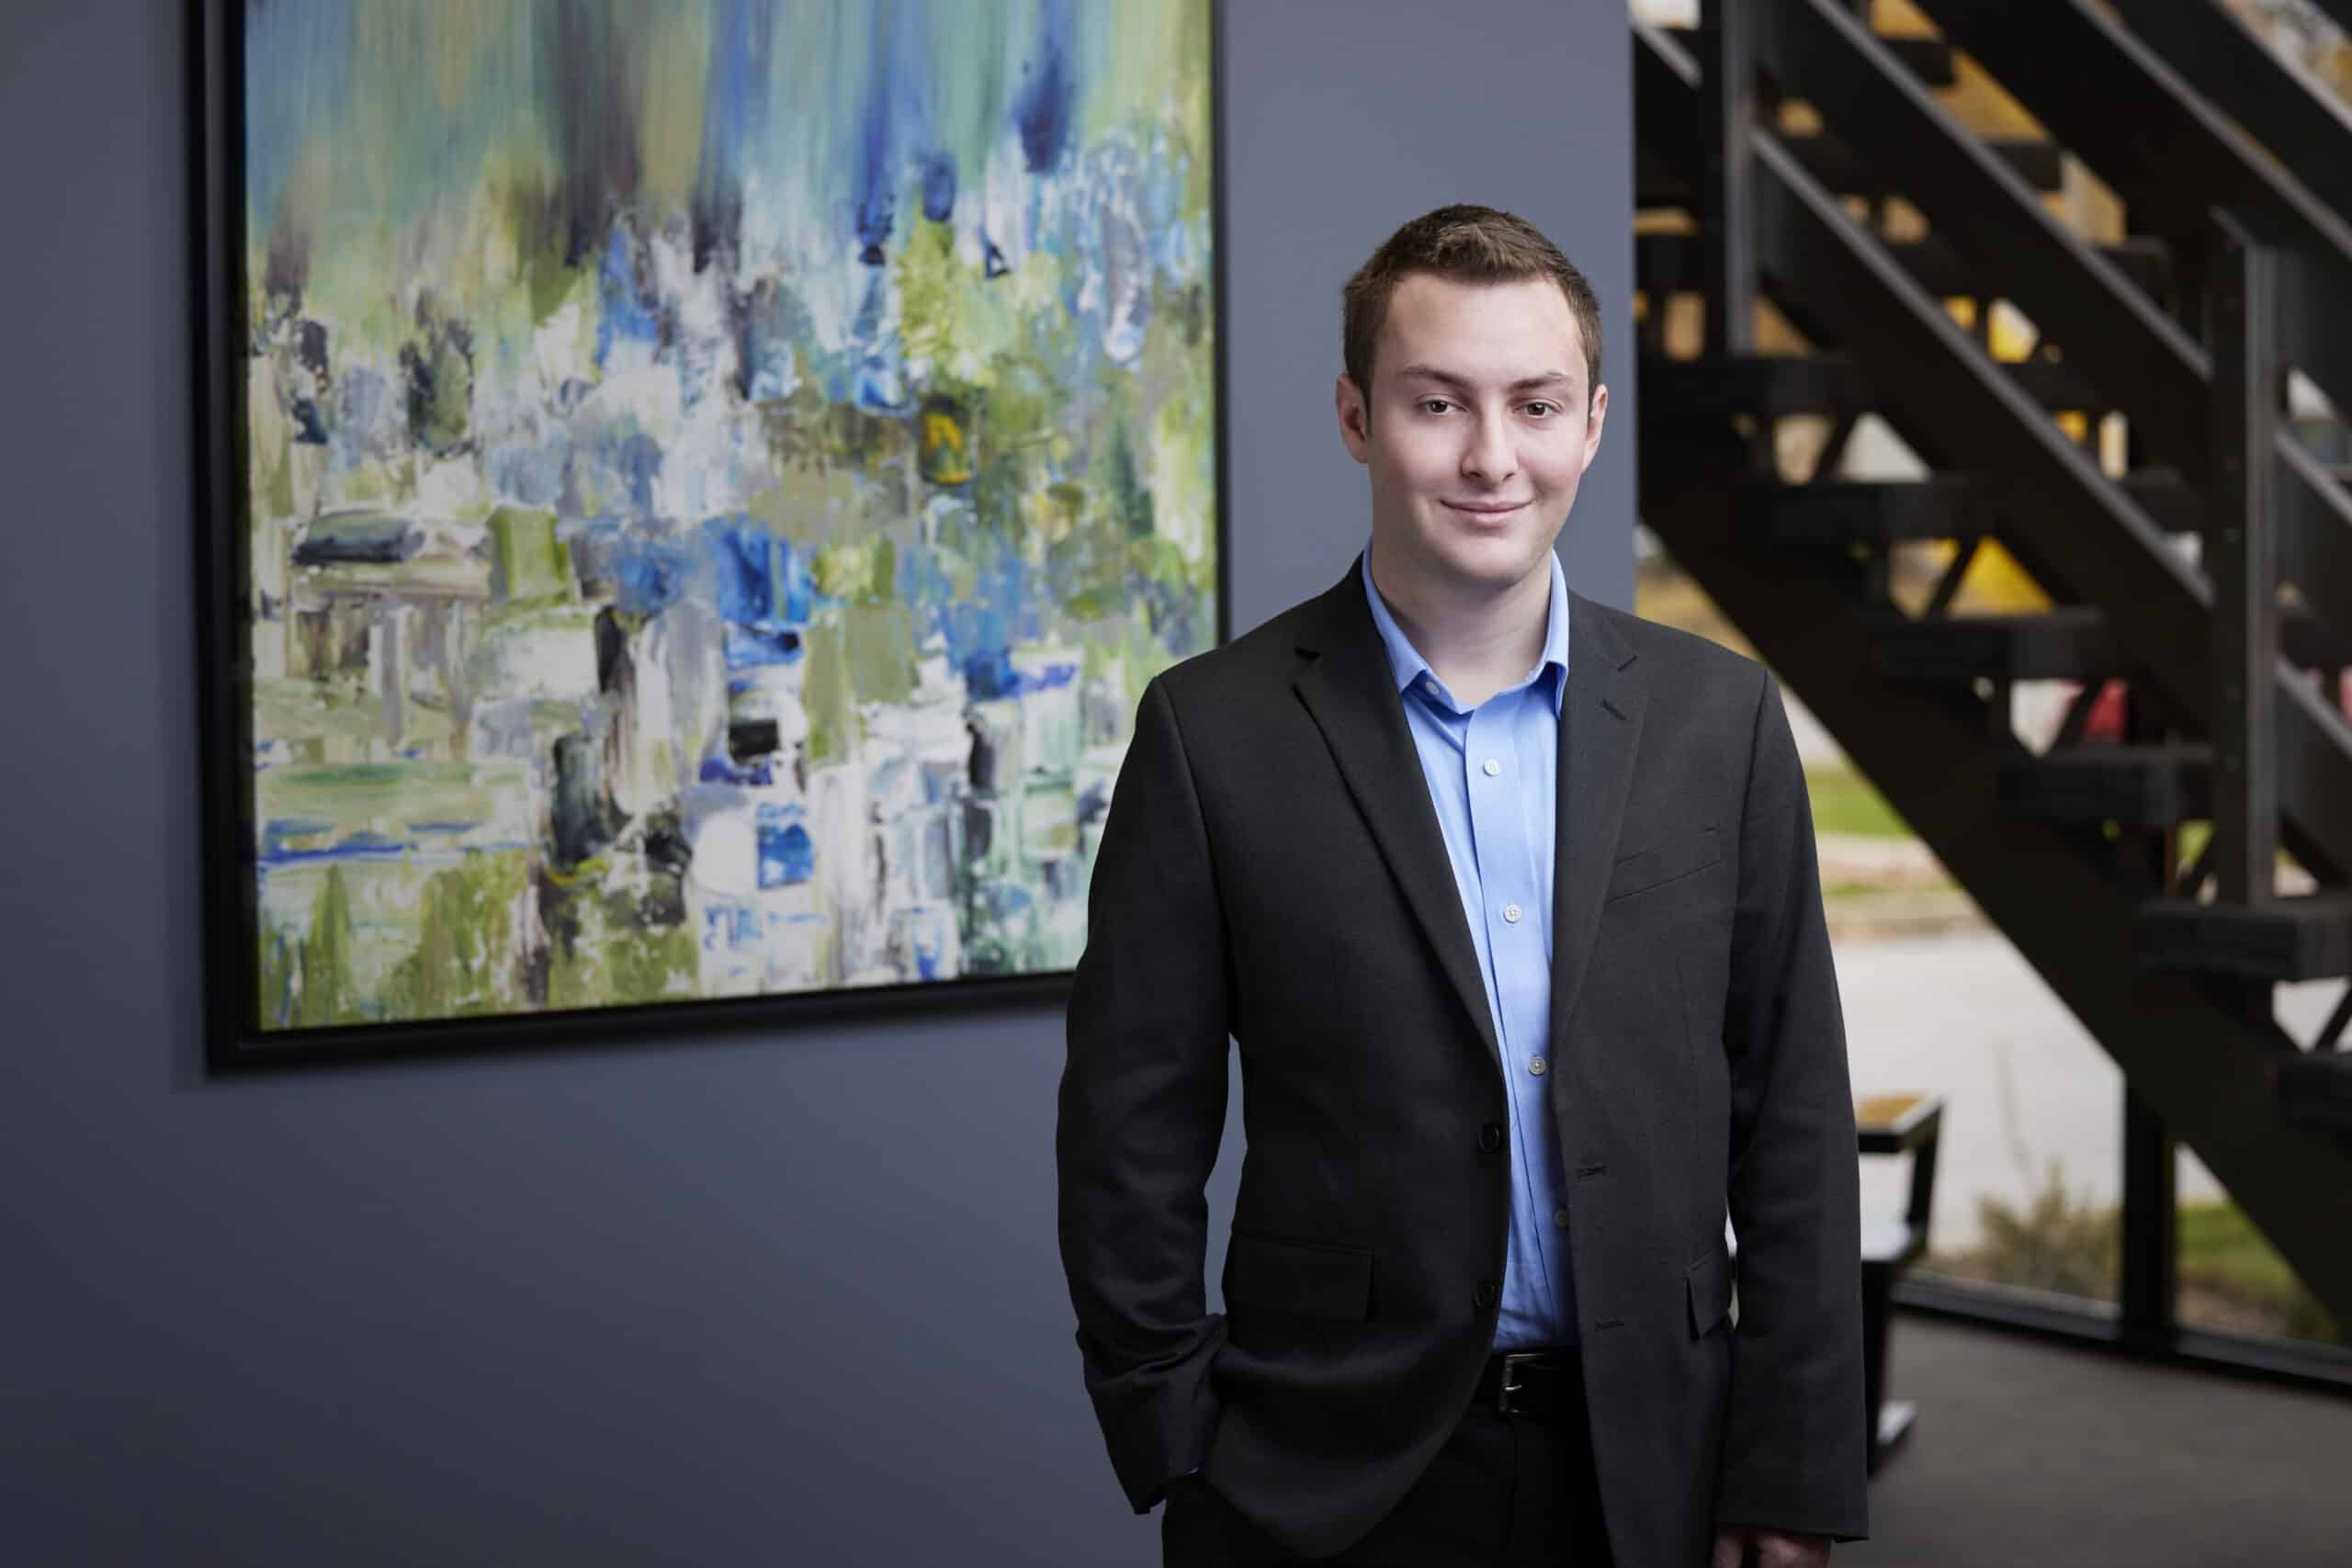 An image of Russell Kaufman, a professional staff intern, standing in the Ford Keast LLP reception area in London.